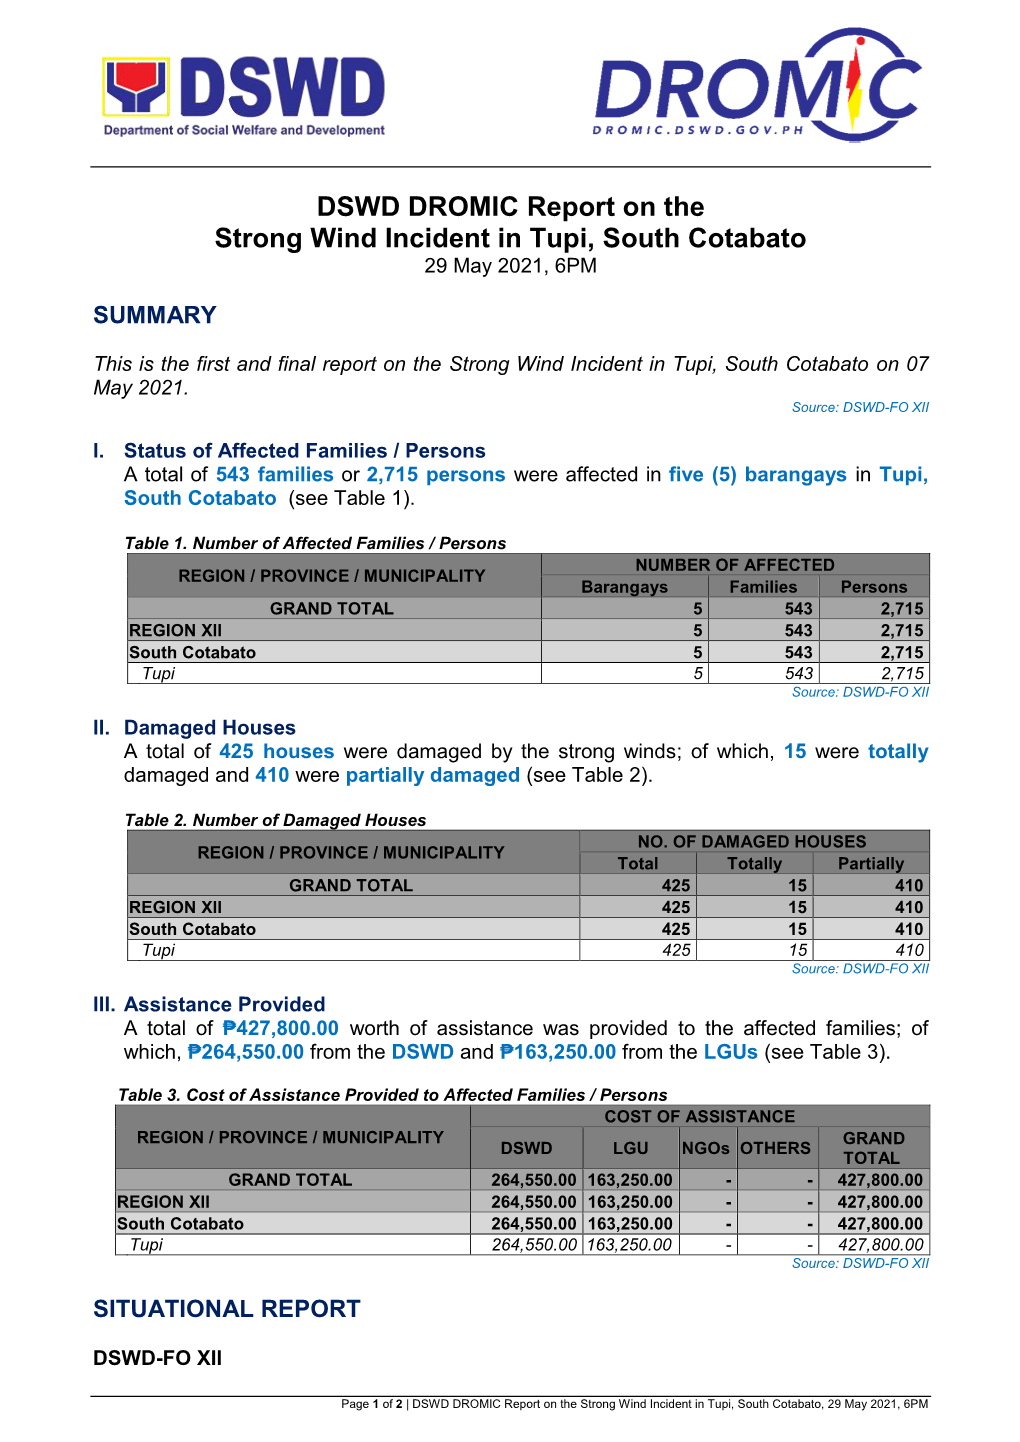 DSWD DROMIC Report on the Strong Wind Incident in Tupi, South Cotabato 29 May 2021, 6PM